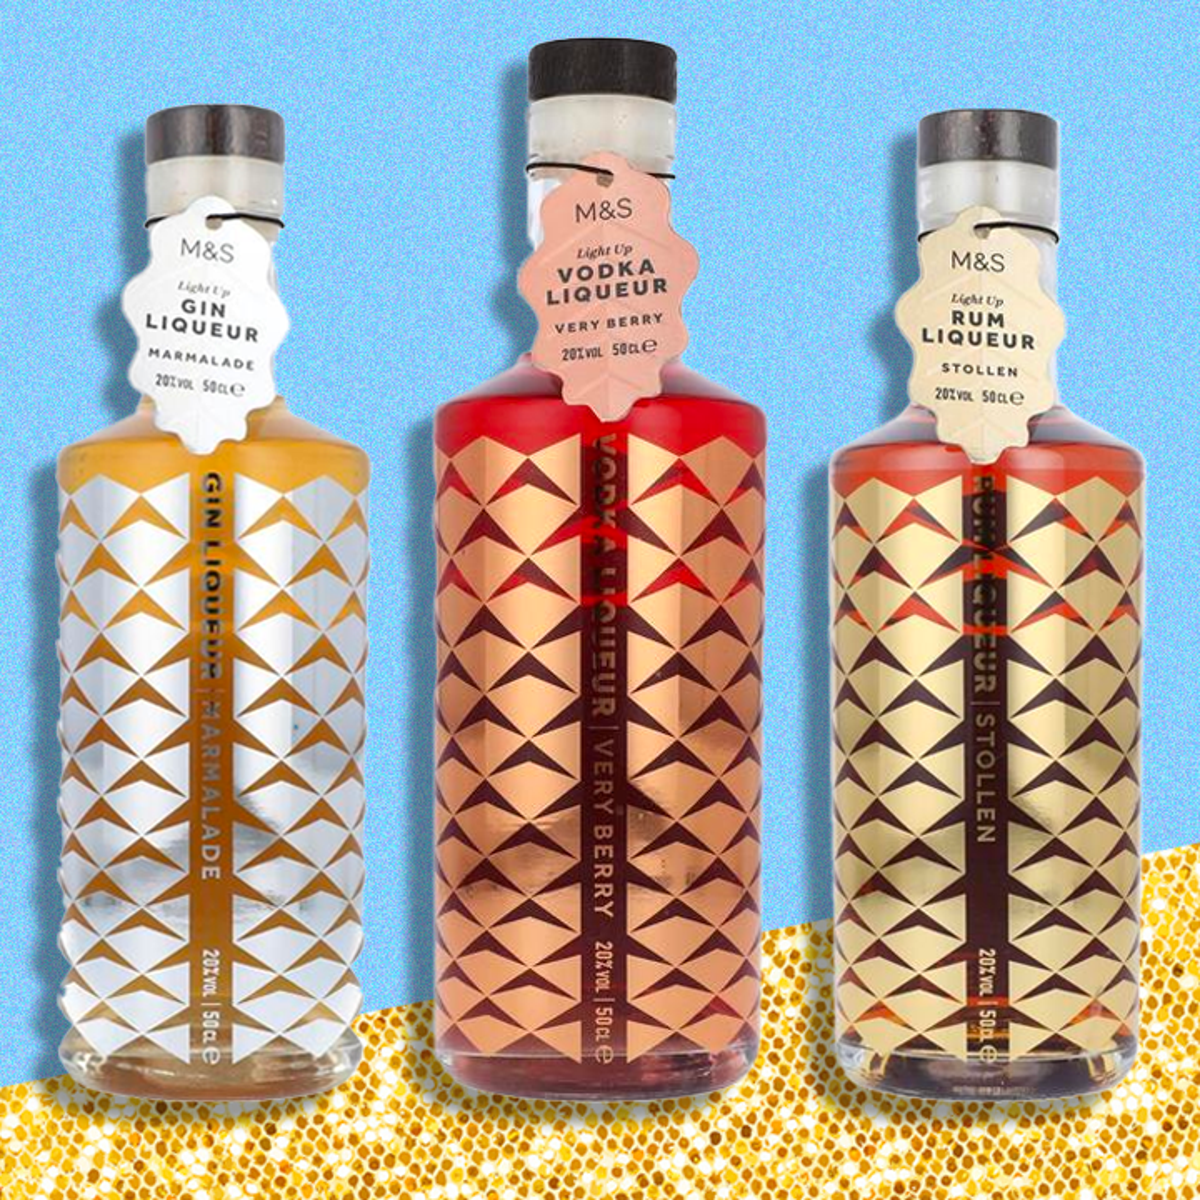 M&S's light-up liqueurs are on sale ahead of Christmas | The Independent